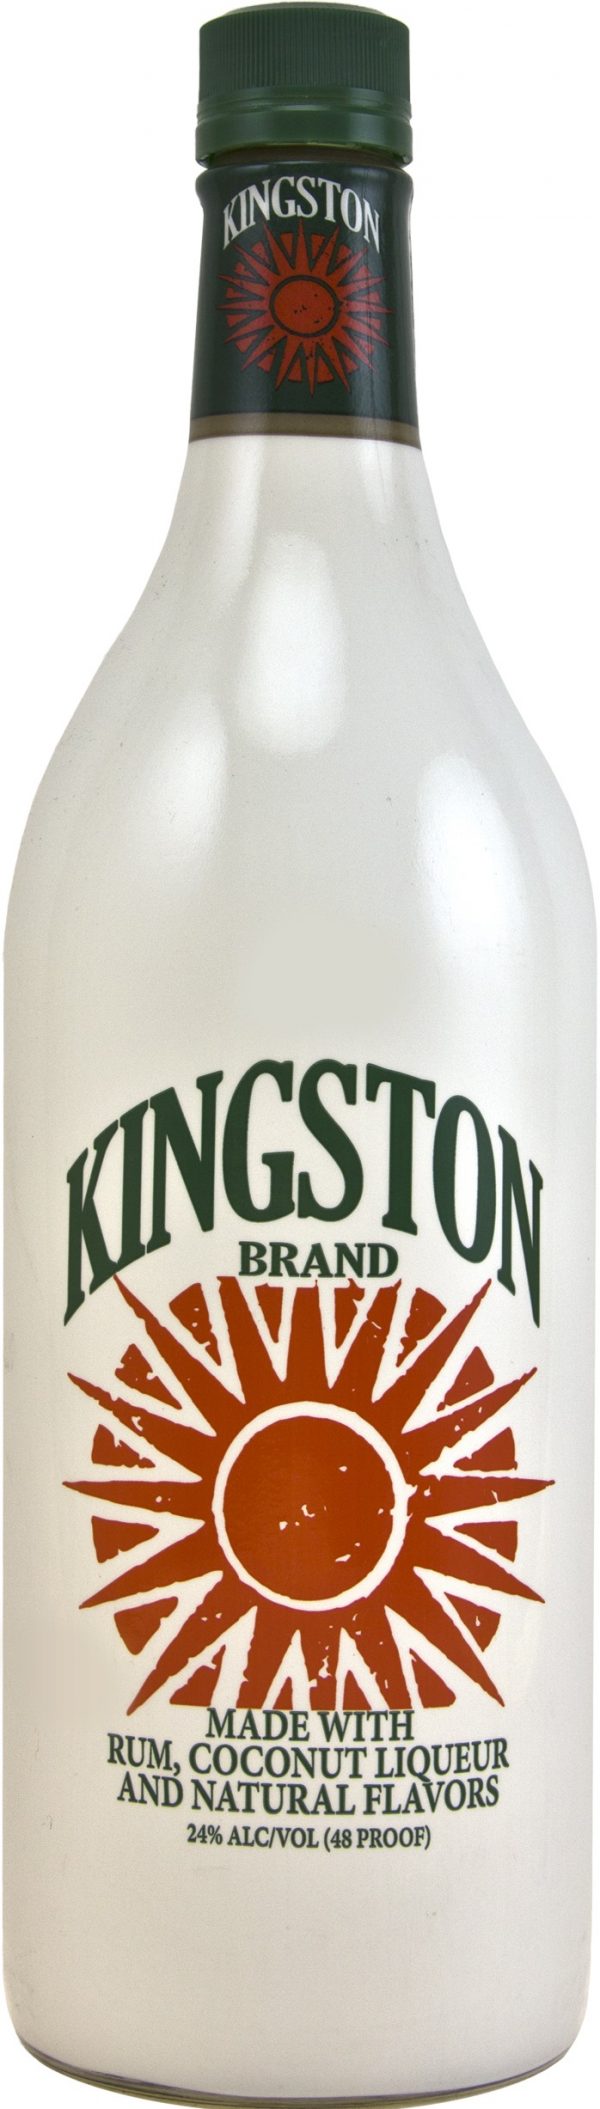 Zoom to enlarge the Kingston Coconut Rum